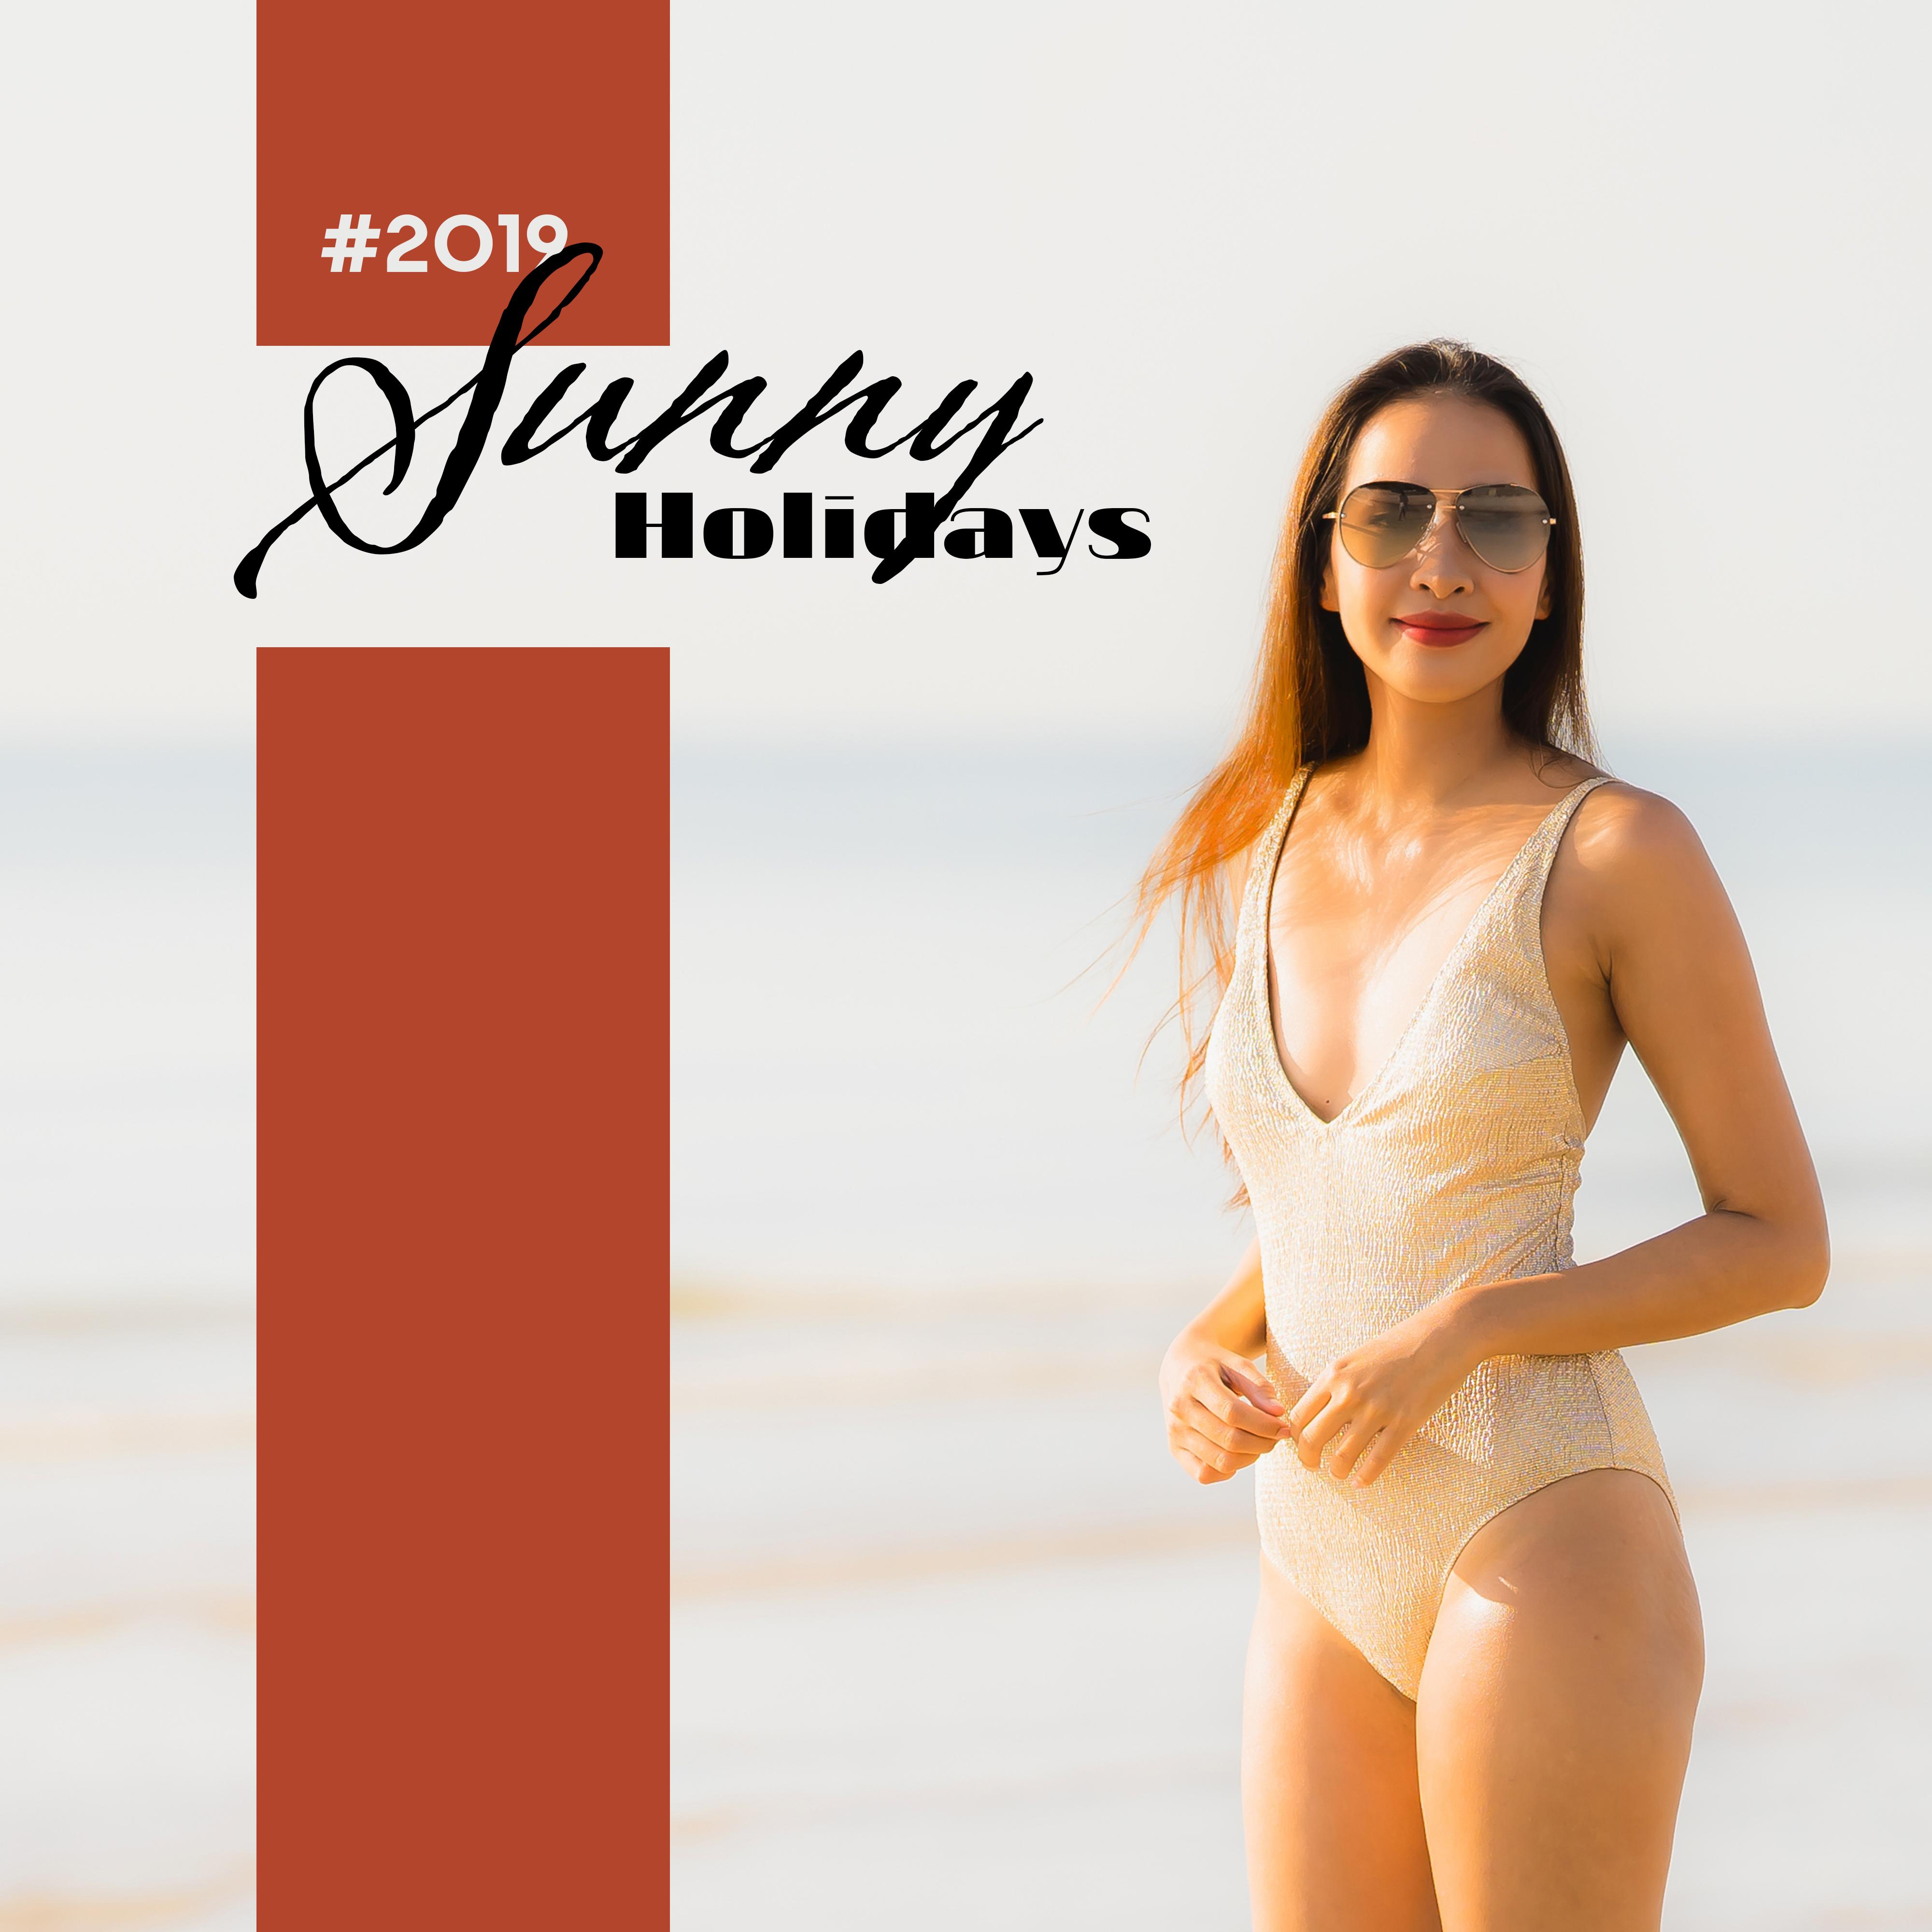 #2019 Sunny Holidays: Music for Well-Deserved Holidays, for Rest and Relaxation, to Chill Out and Tranquility, Chillout Sounds for the Beach, Music for a Cottage in the Mountains